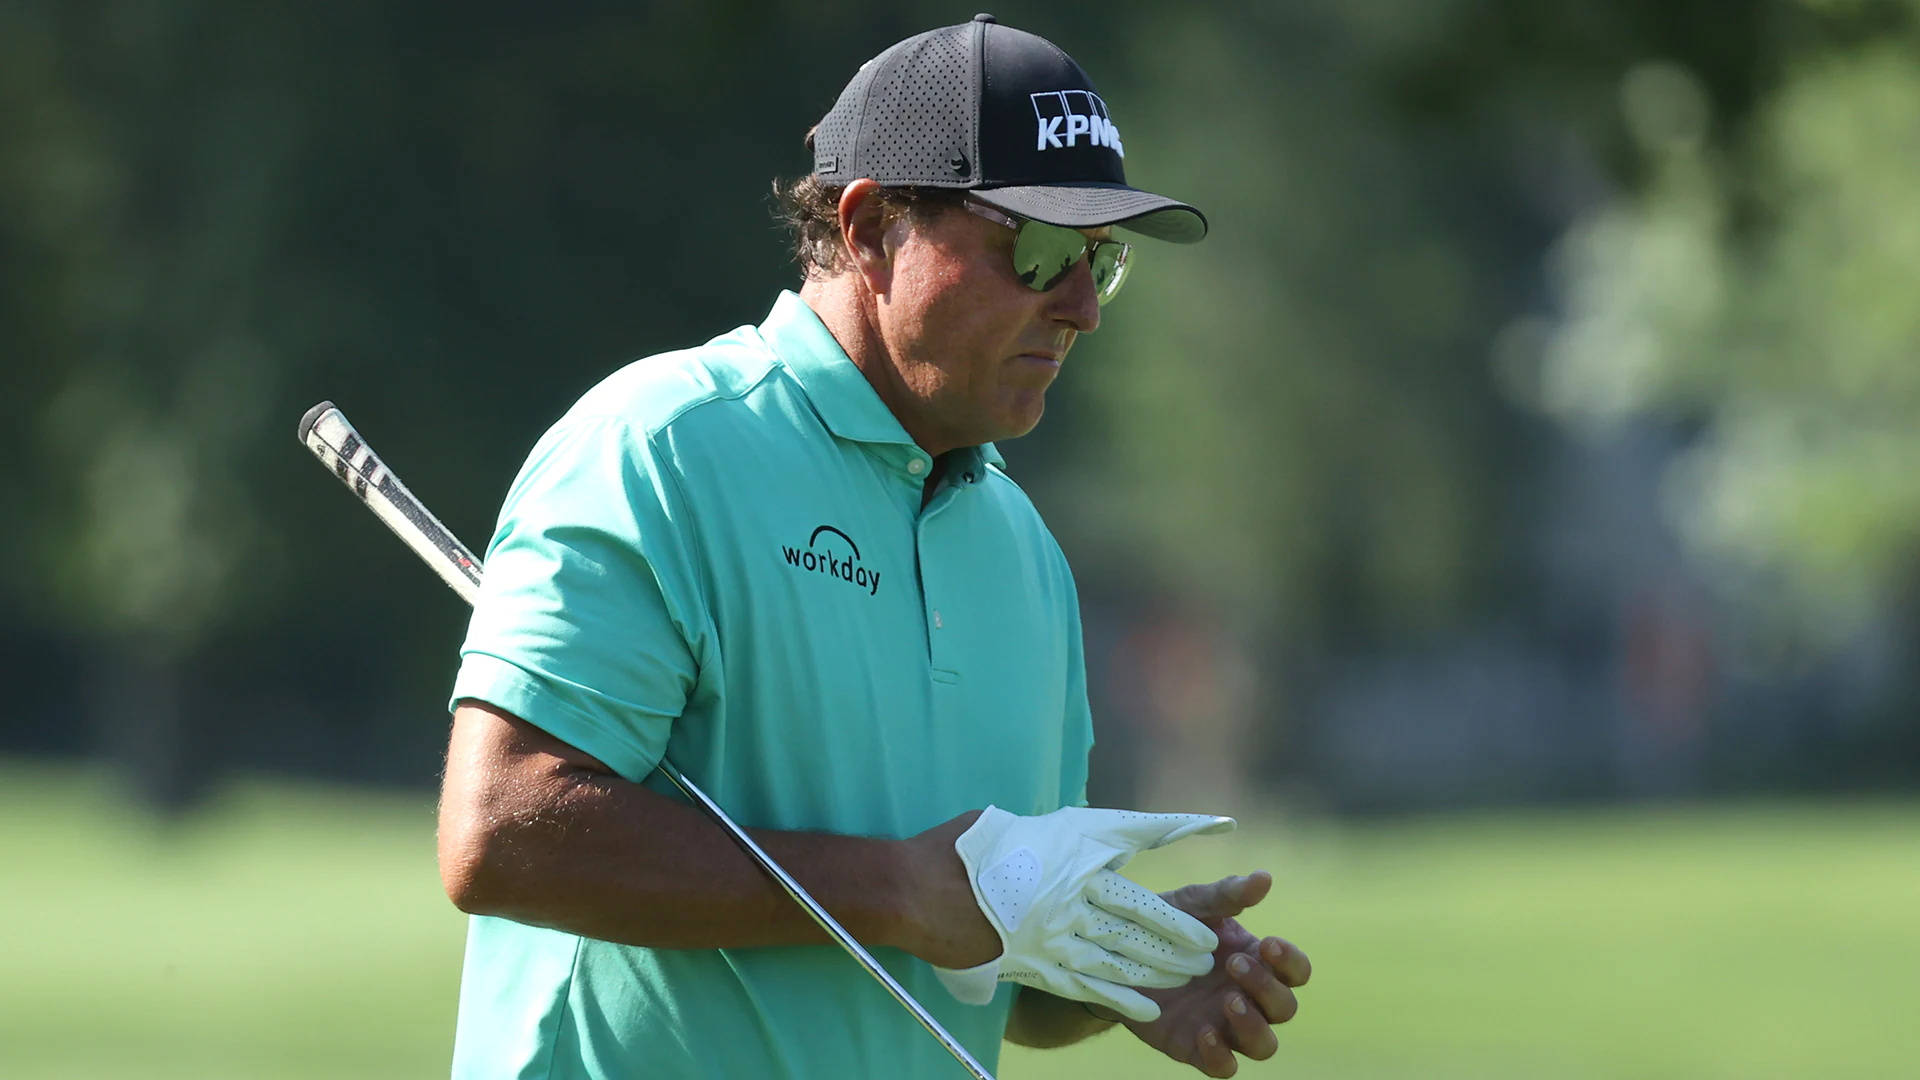 After ‘selfish’ article, Phil Mickelson doesn’t see himself playing in Detroit again